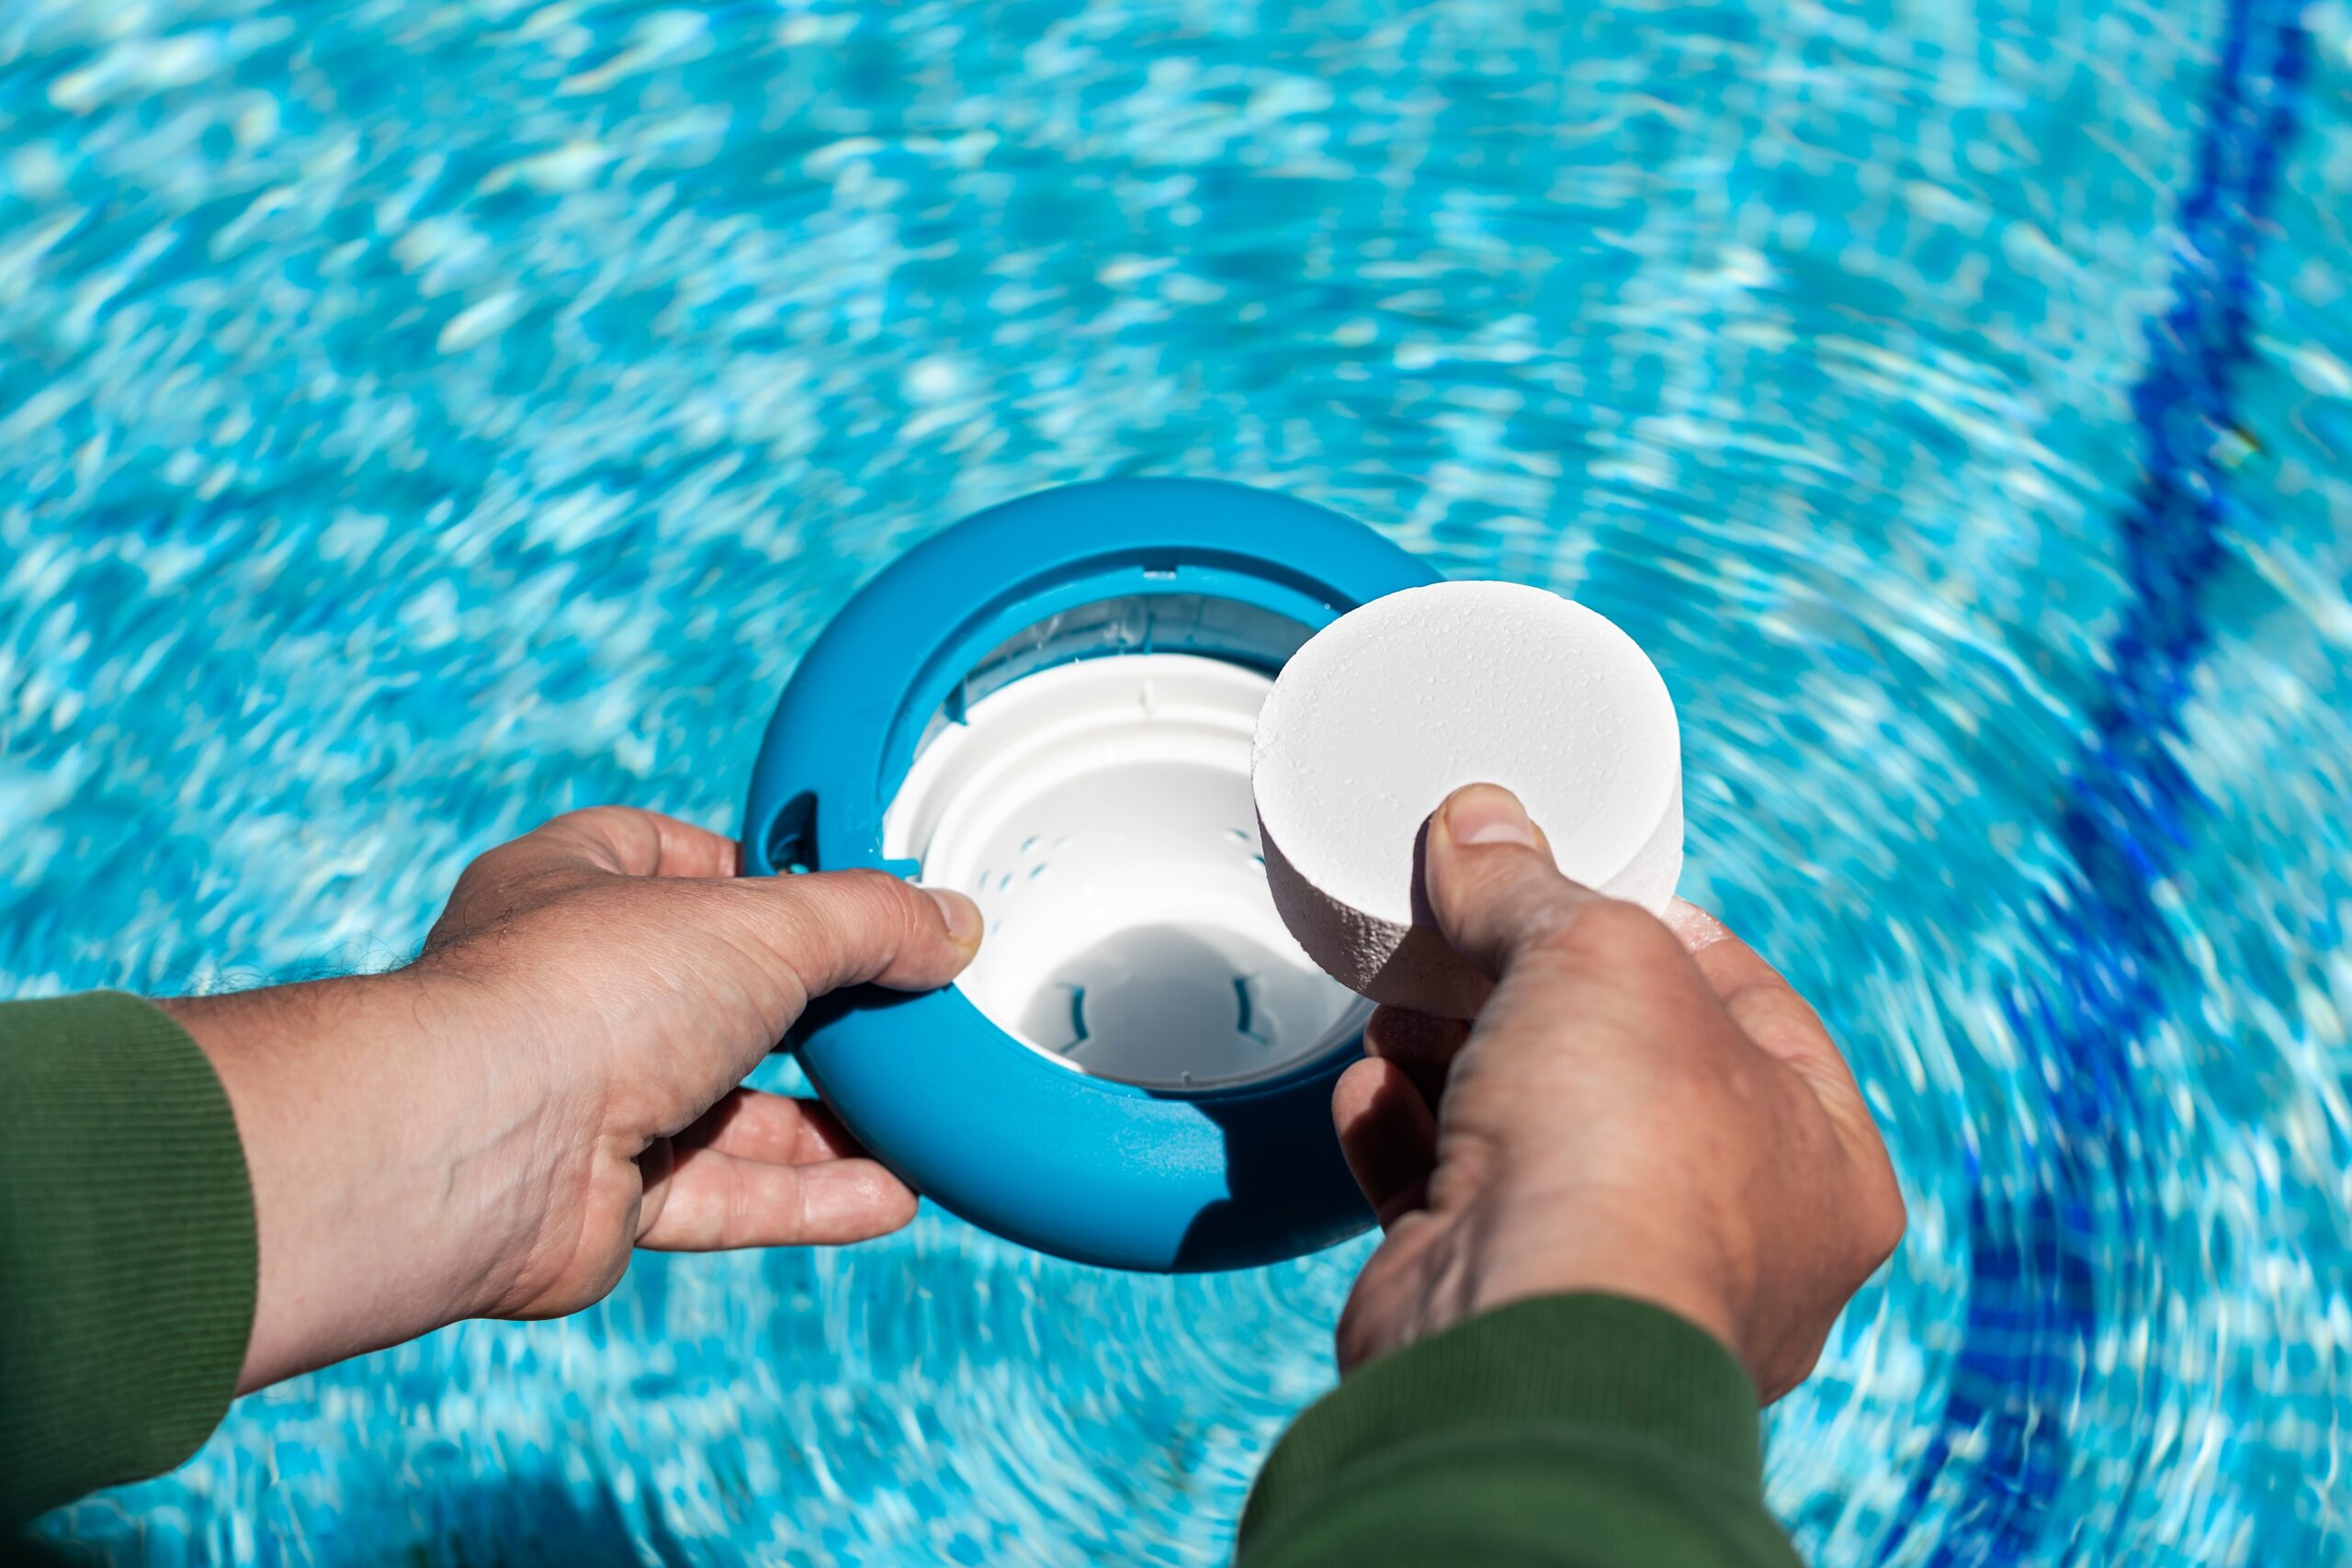 Operator's hand introducing white chlorine tablets on the pool skimmer. Chlorine tablets for pool water. disinfection and prevention against the development of microbes. Floating dispenser for ch